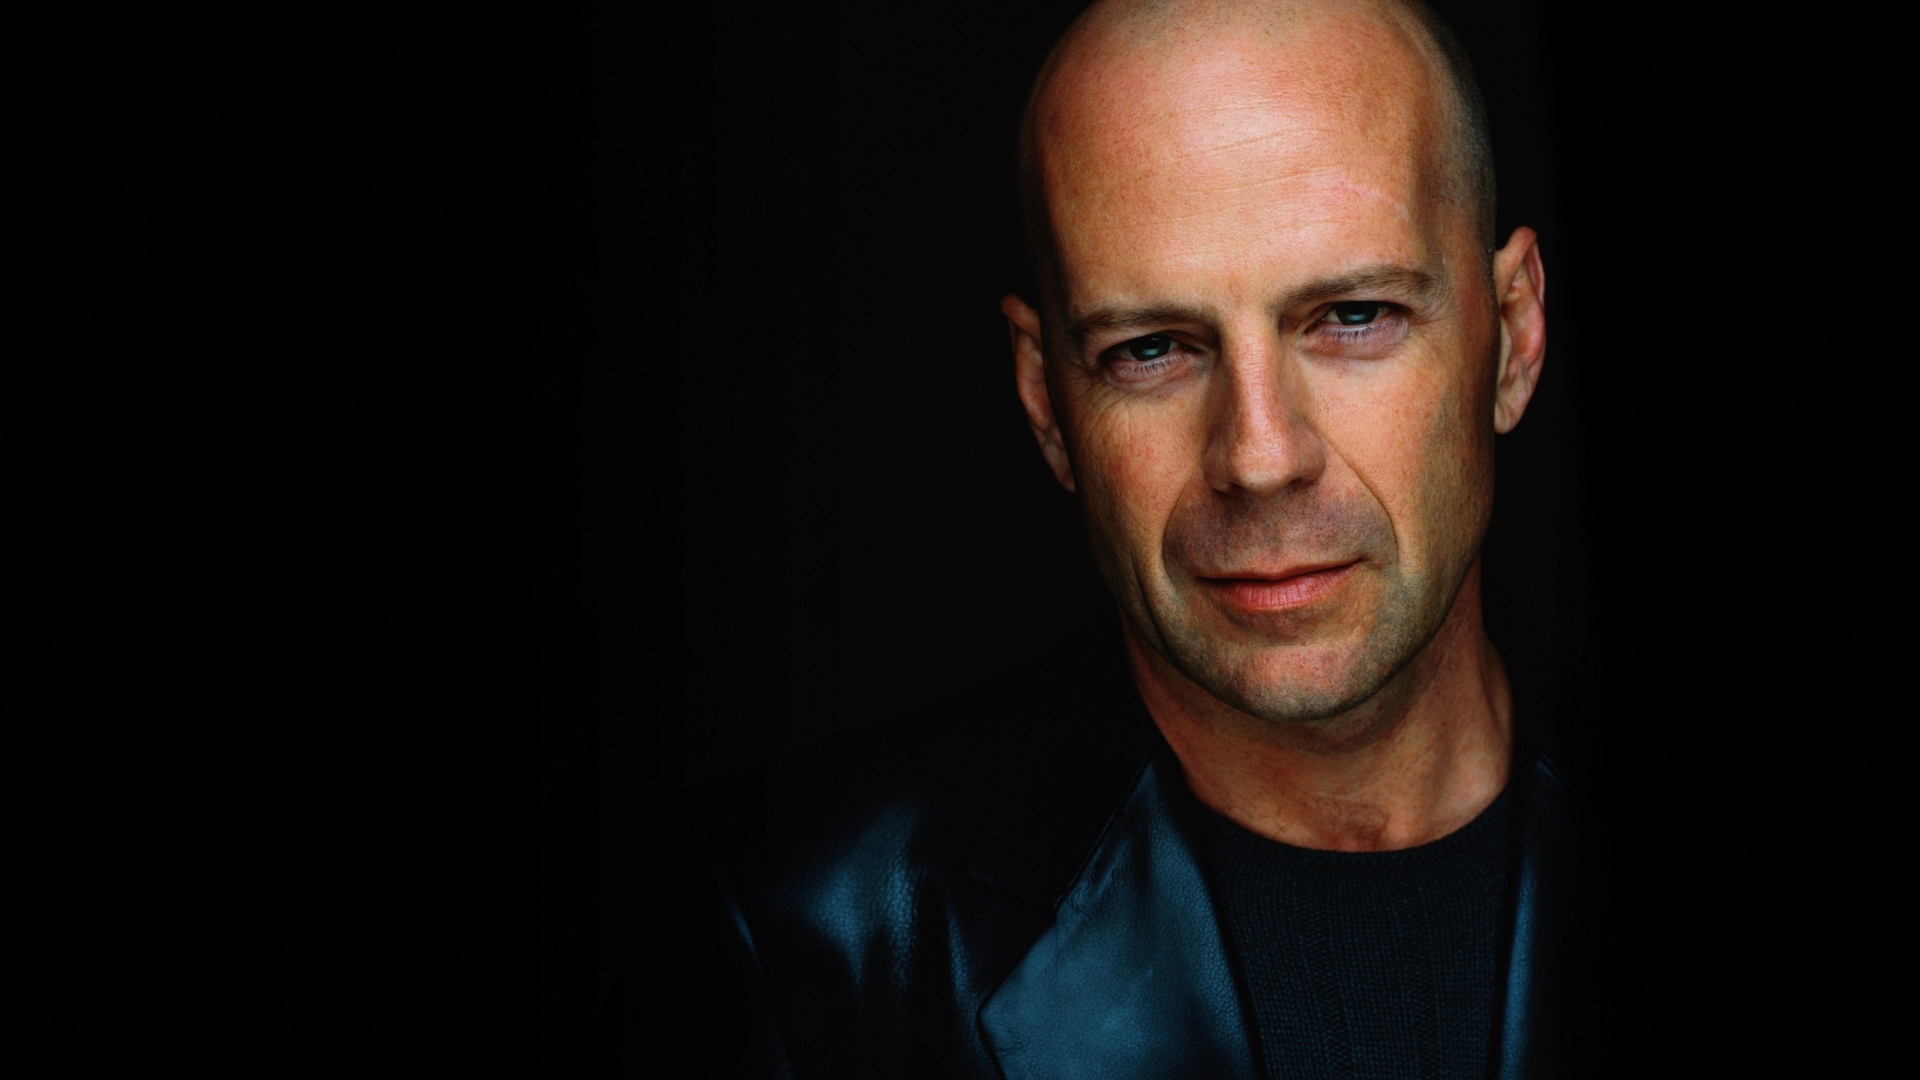 Bruce Willis Profile Look for 1920 x 1080 HDTV 1080p resolution